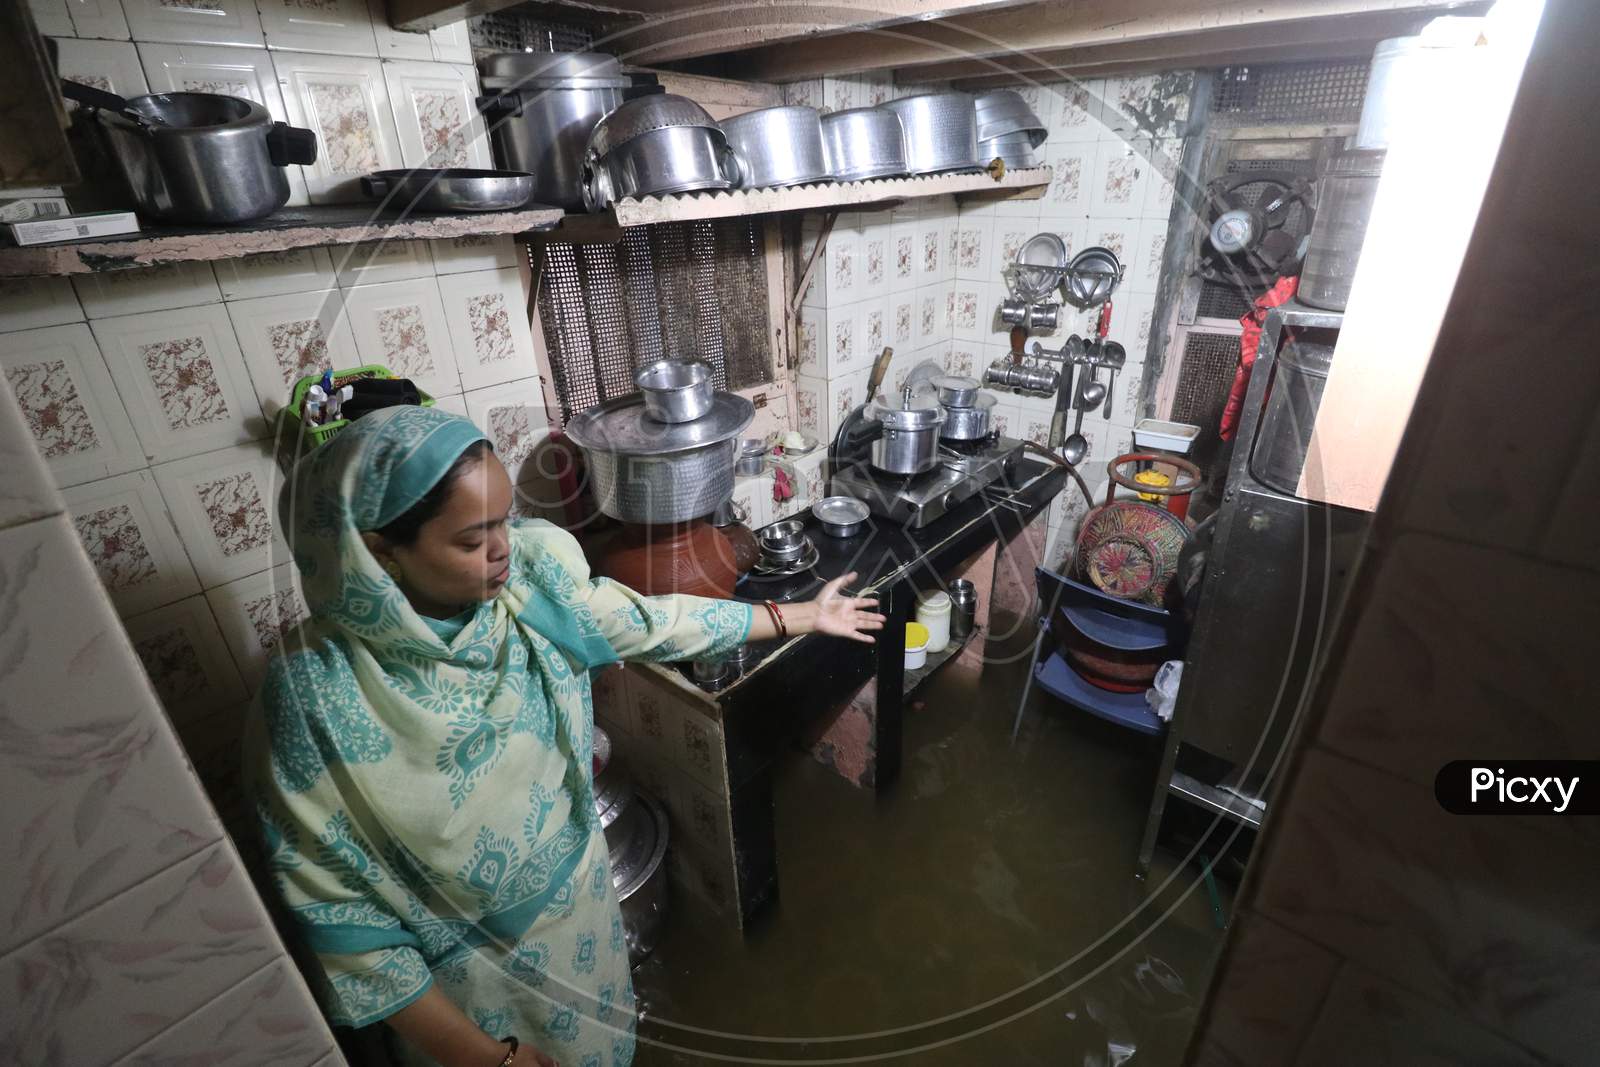 A woman show the kitchen inside her house that is waterlogged due heavy rains, in Mumbai, India on September 23, 2020.